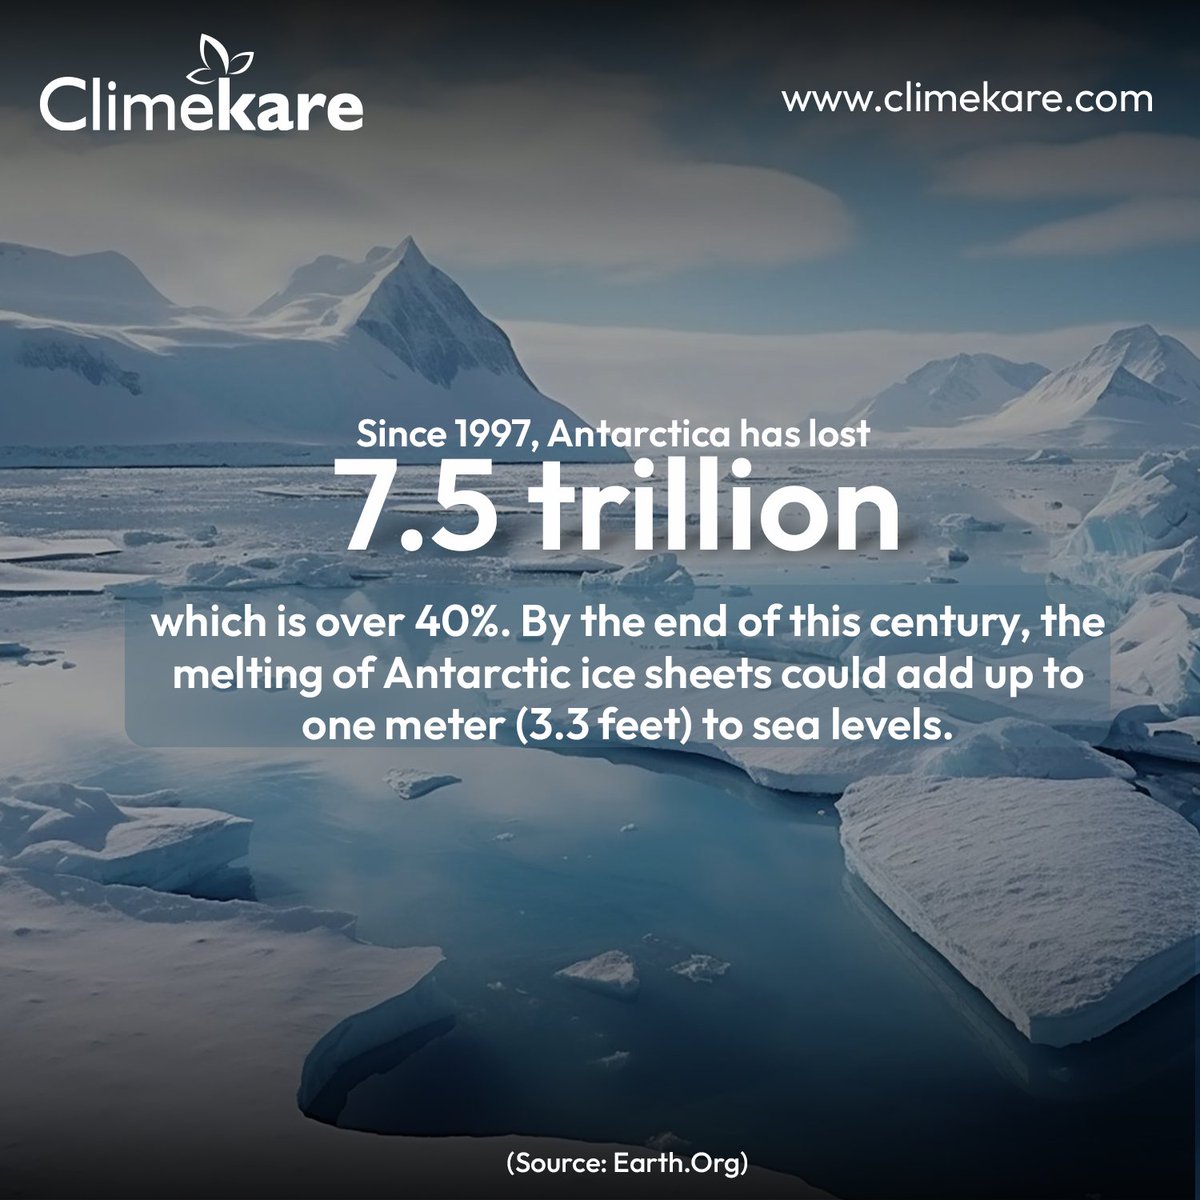 #sustainability #climekare #carbonimpact #carbonpositive #sustainableliving #environment #carbonfoodprint #ActNow #climate